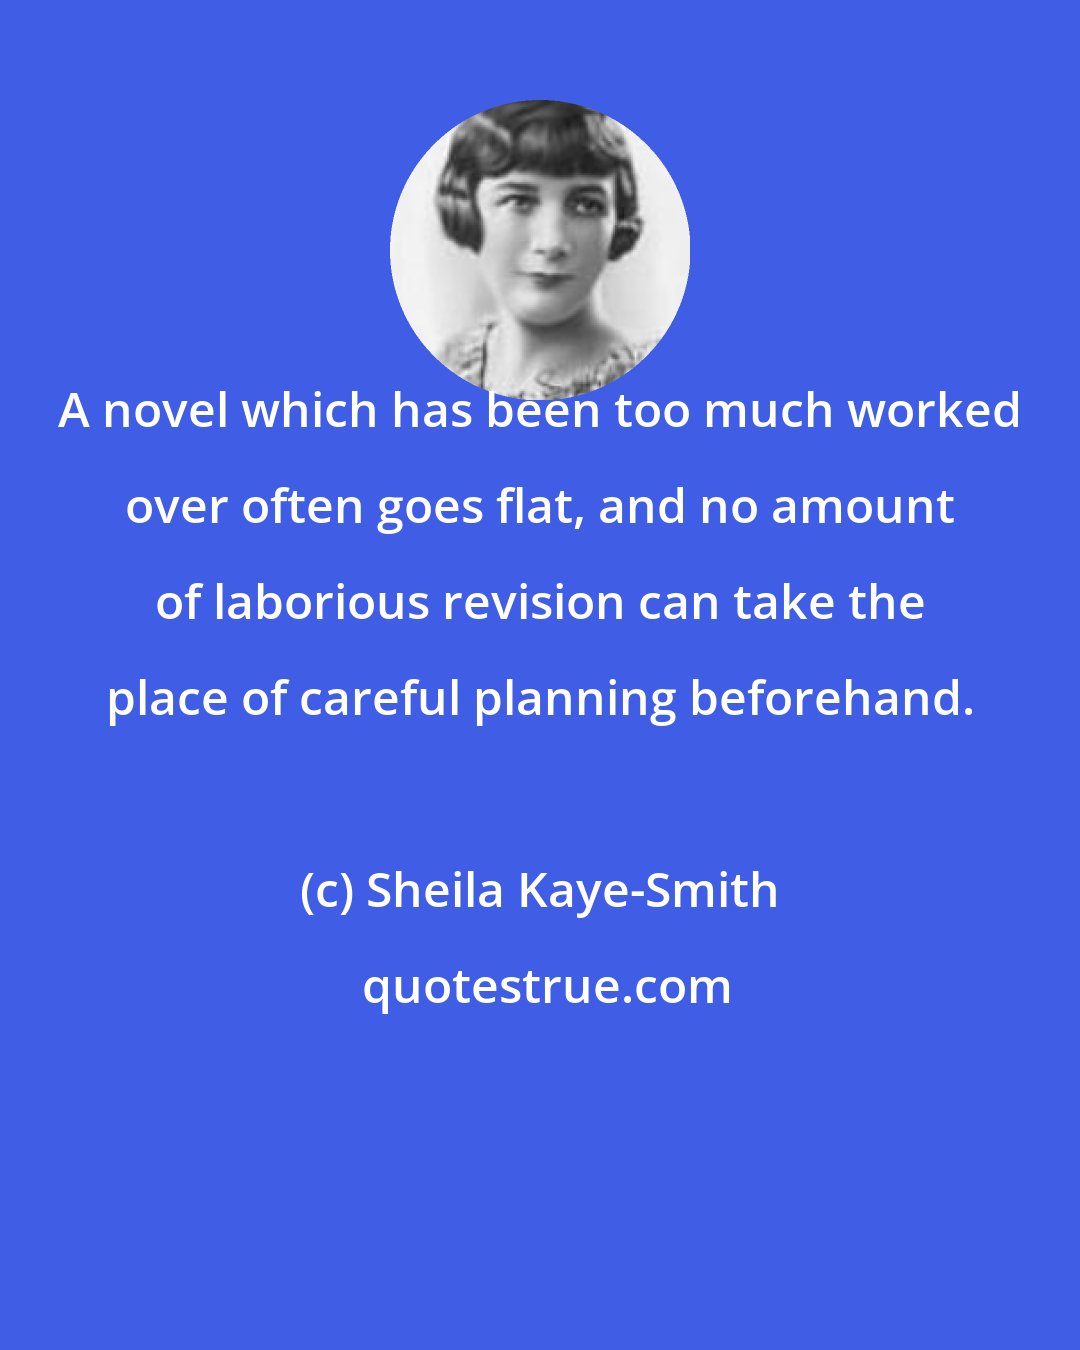 Sheila Kaye-Smith: A novel which has been too much worked over often goes flat, and no amount of laborious revision can take the place of careful planning beforehand.